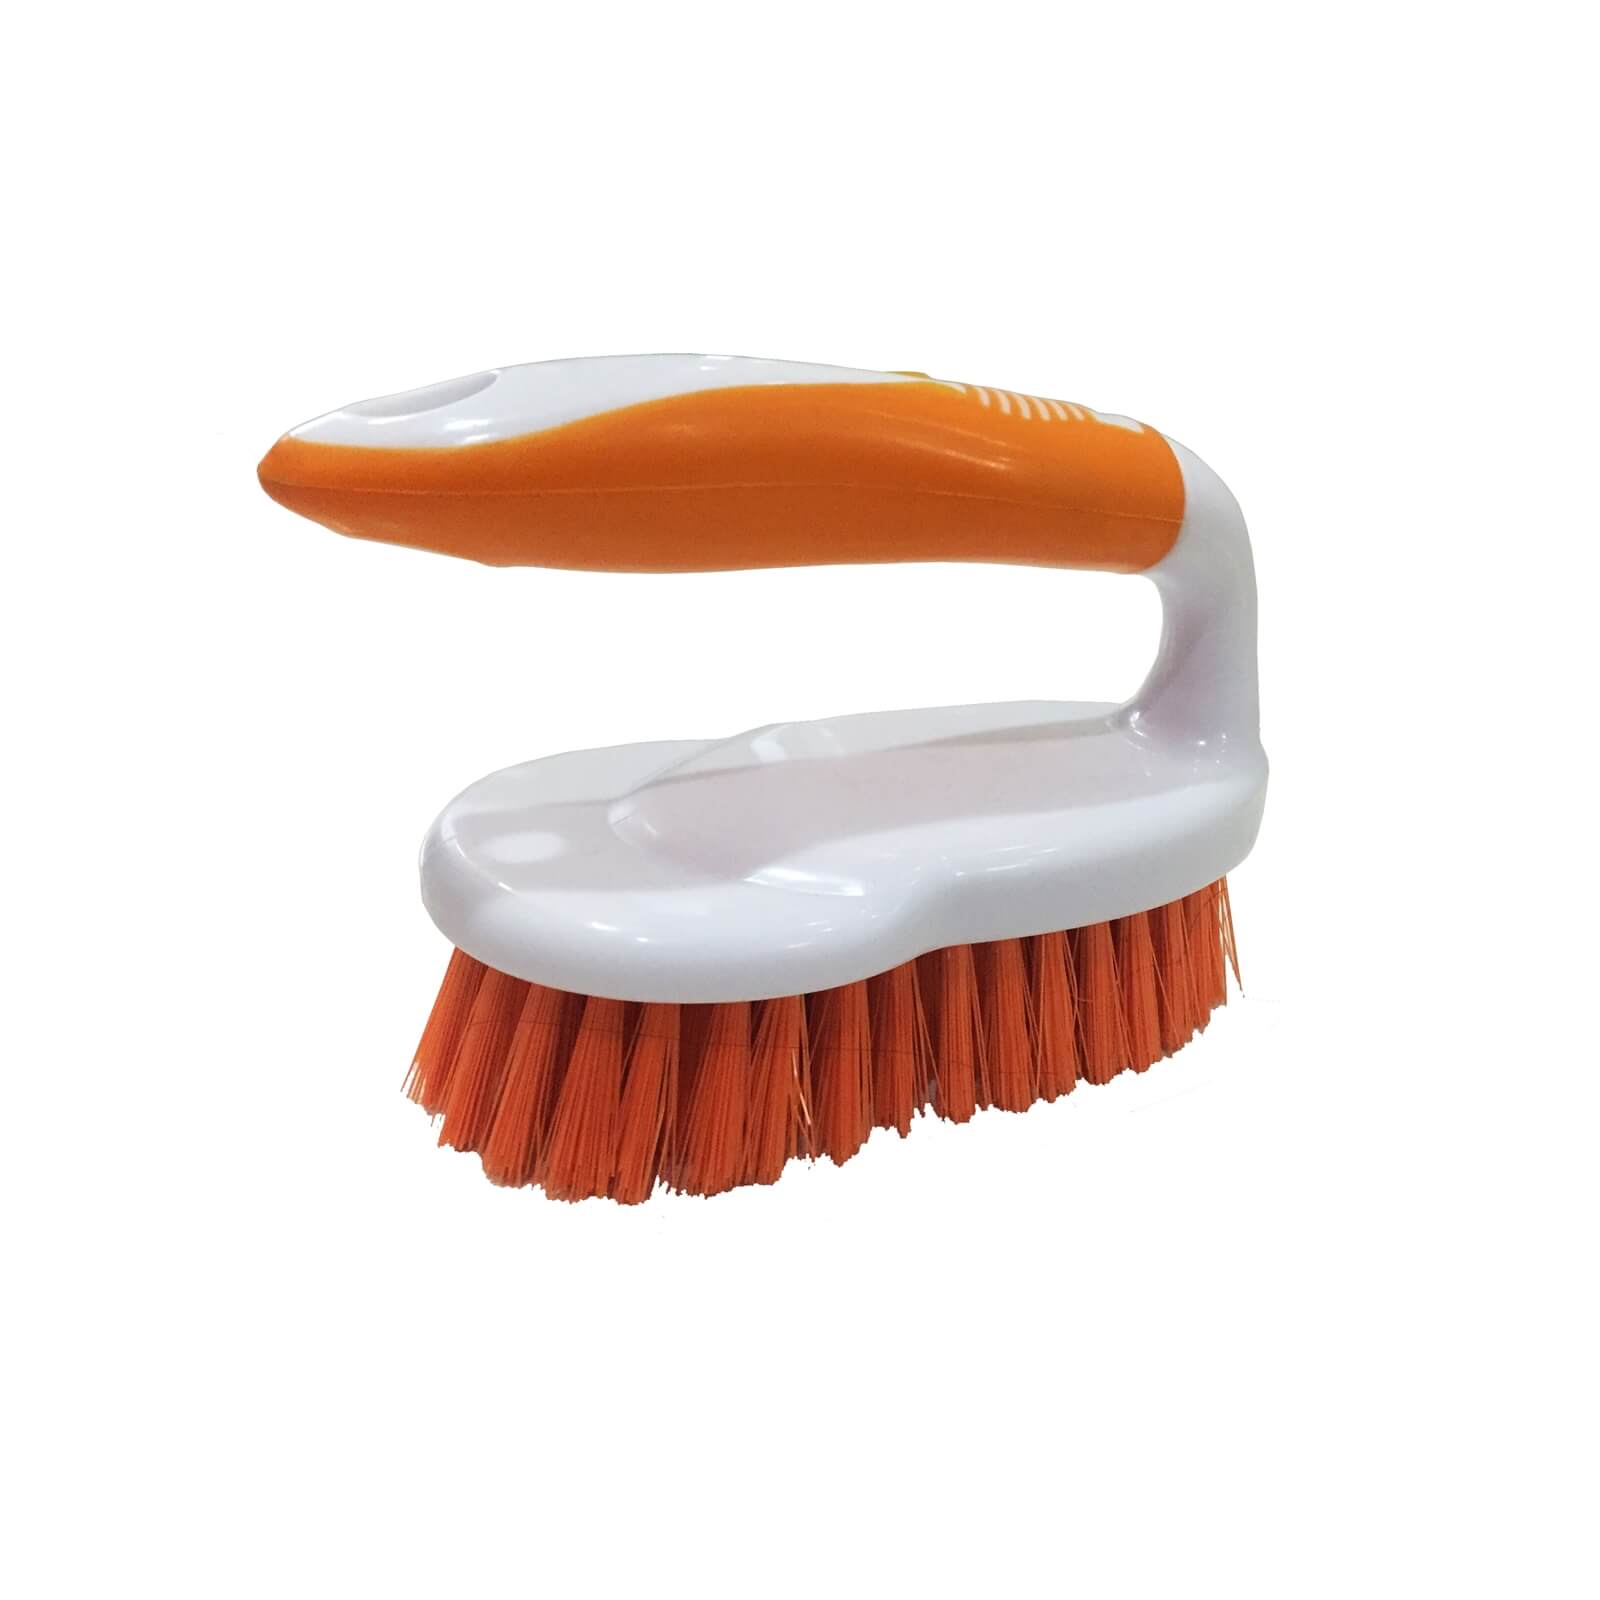 Laundry Scrubbing Brush With Handle